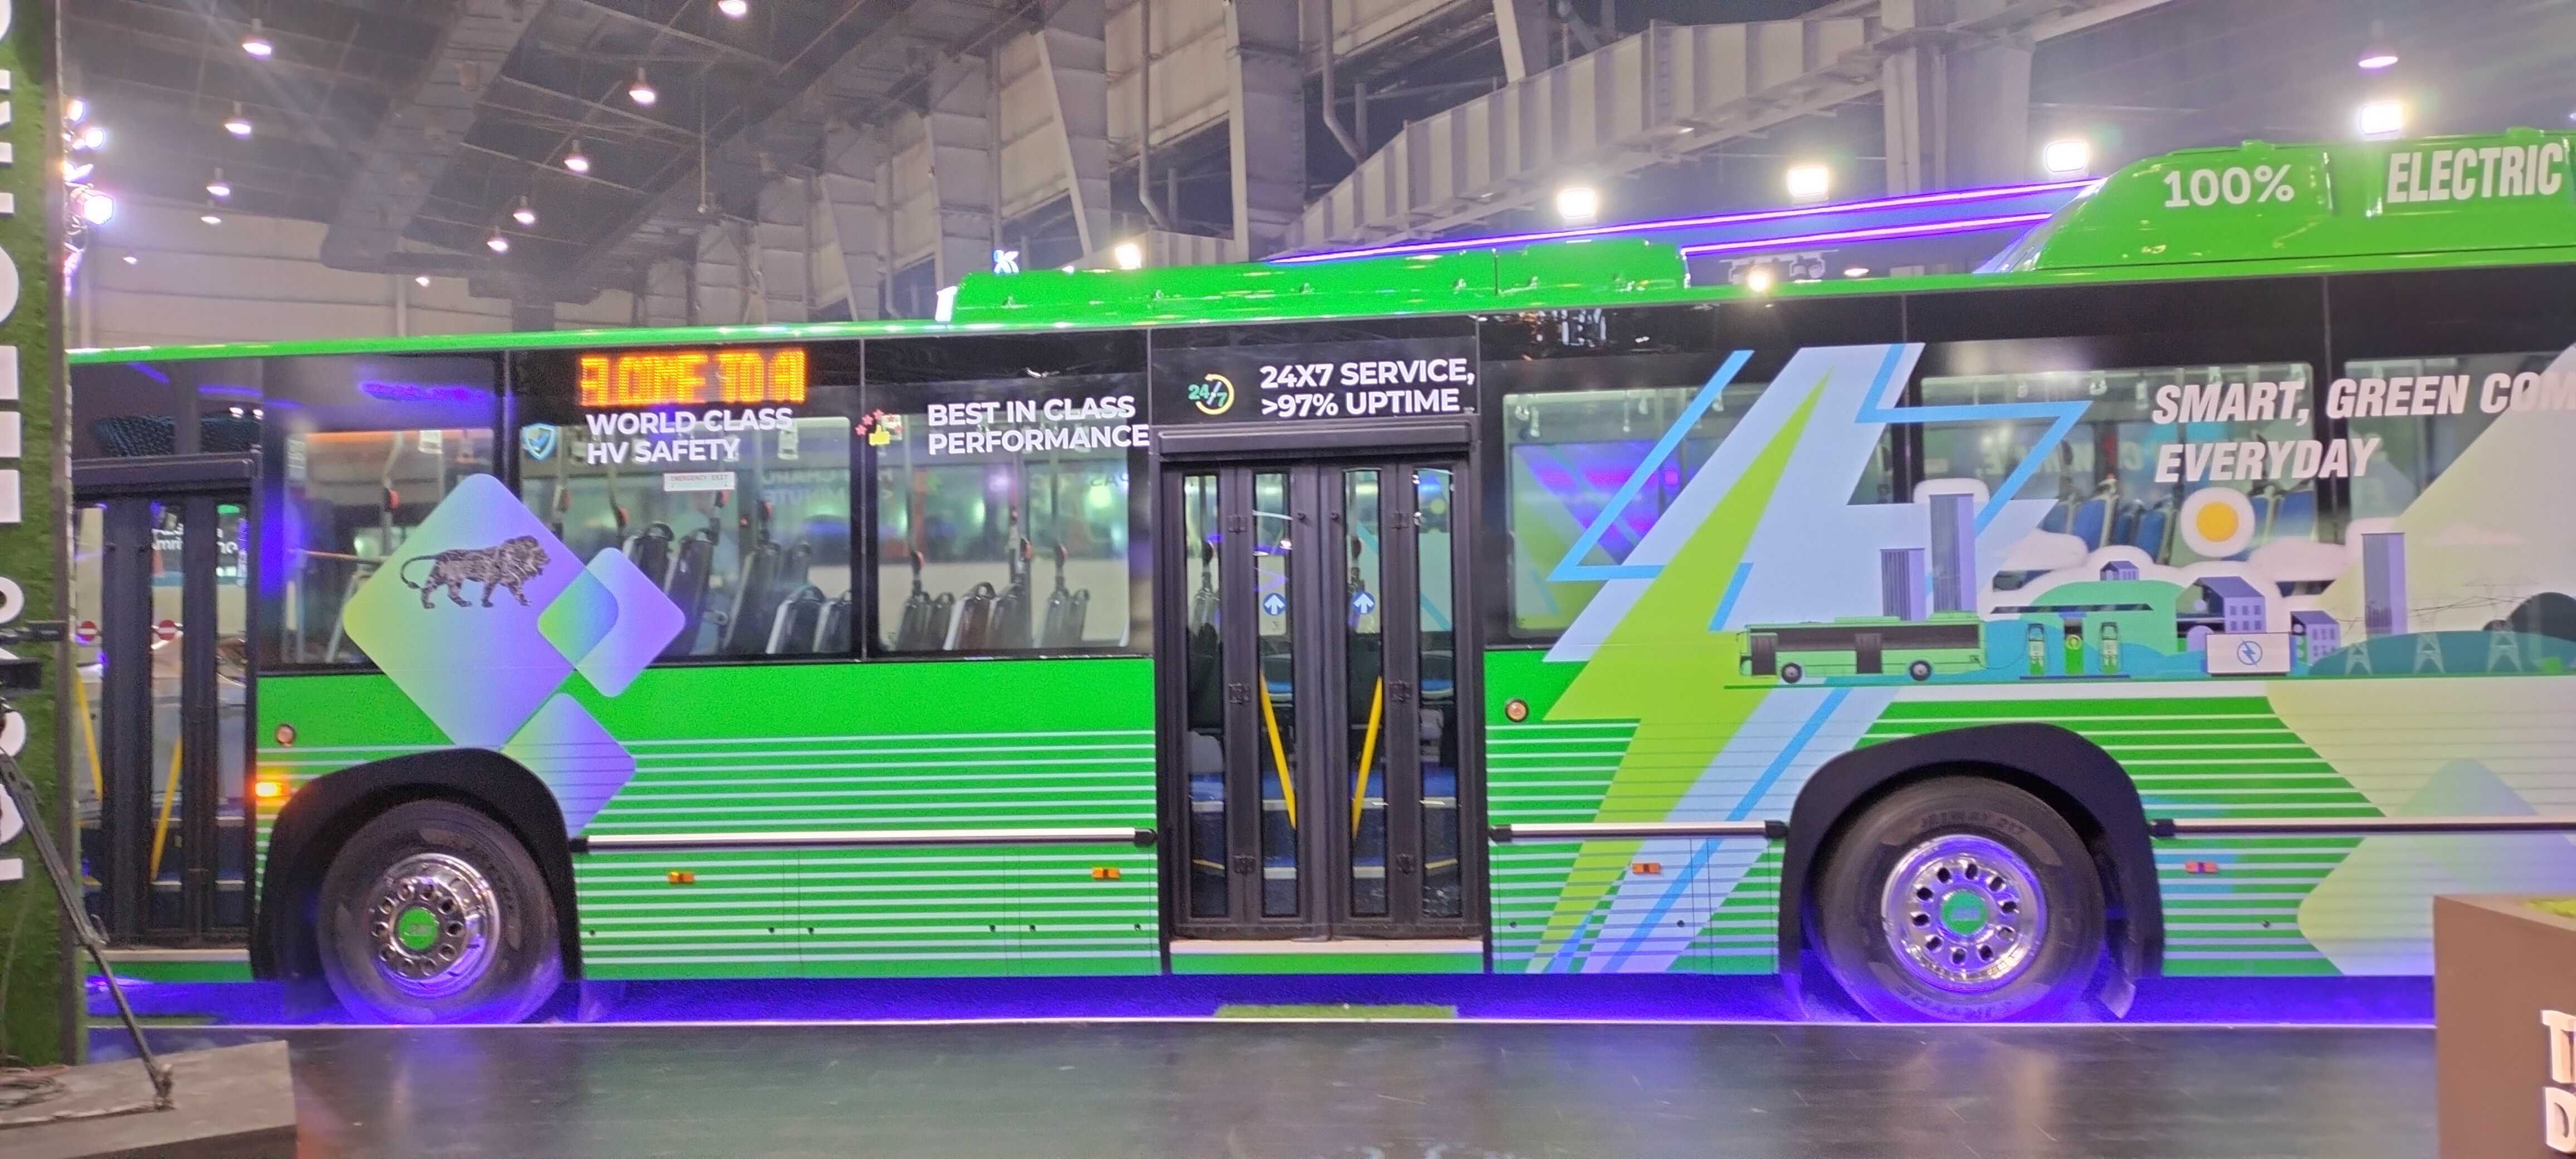 Auto Expo 2023 Live Updates:  JBM Auto showcased 3 new products in its electric bus series that cater to diverse platforms like city, staff and school segments.